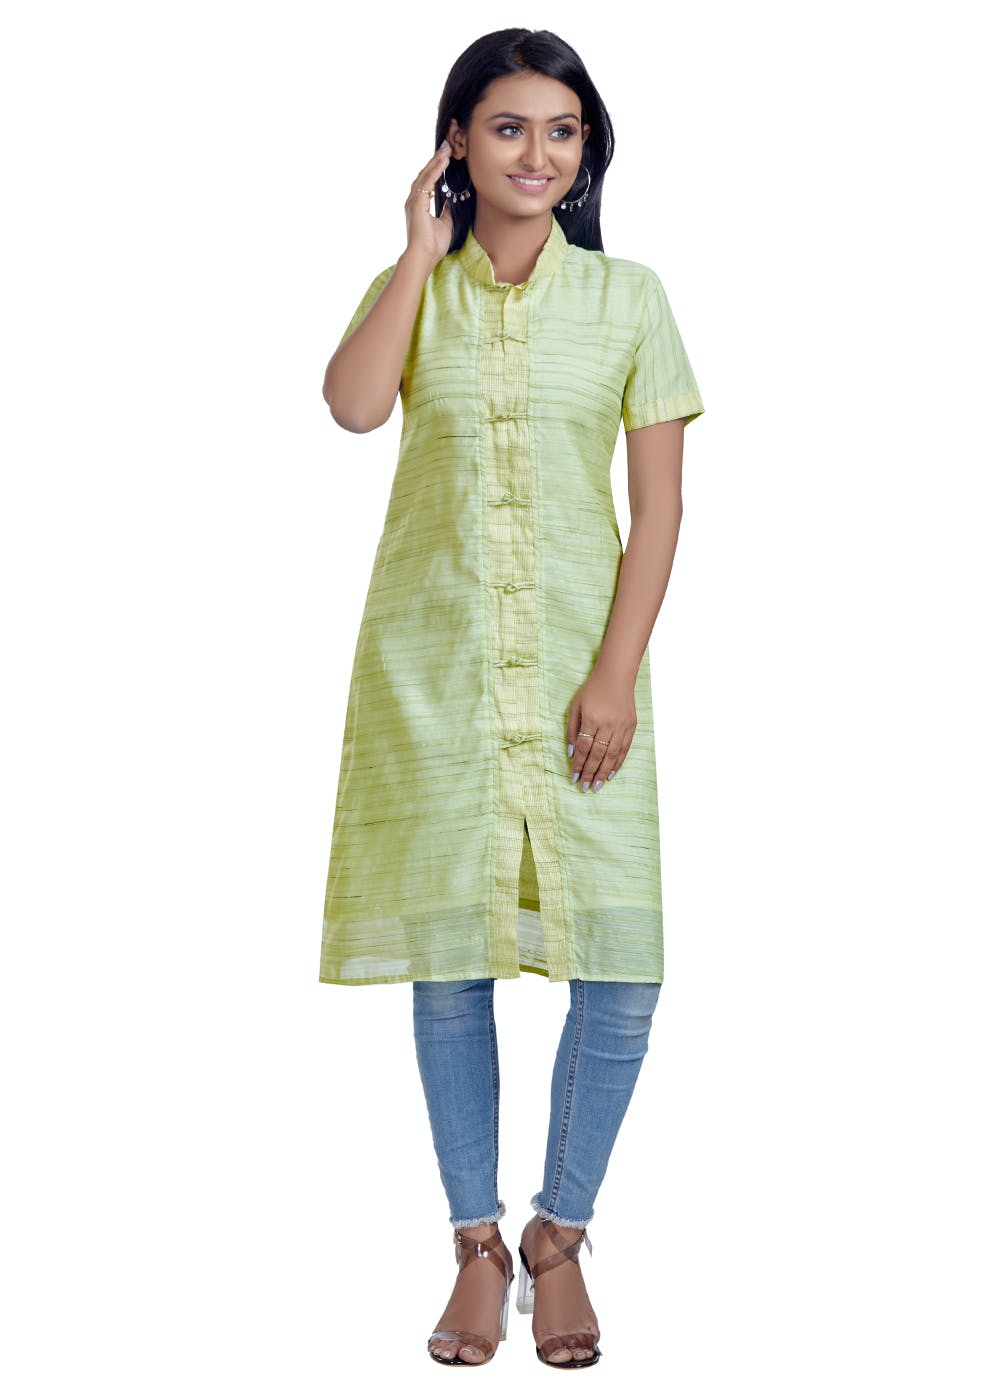 Cotton Ladies Front Open Kurti With Palazzo at Rs 10800/piece in New Delhi  | ID: 16567411012